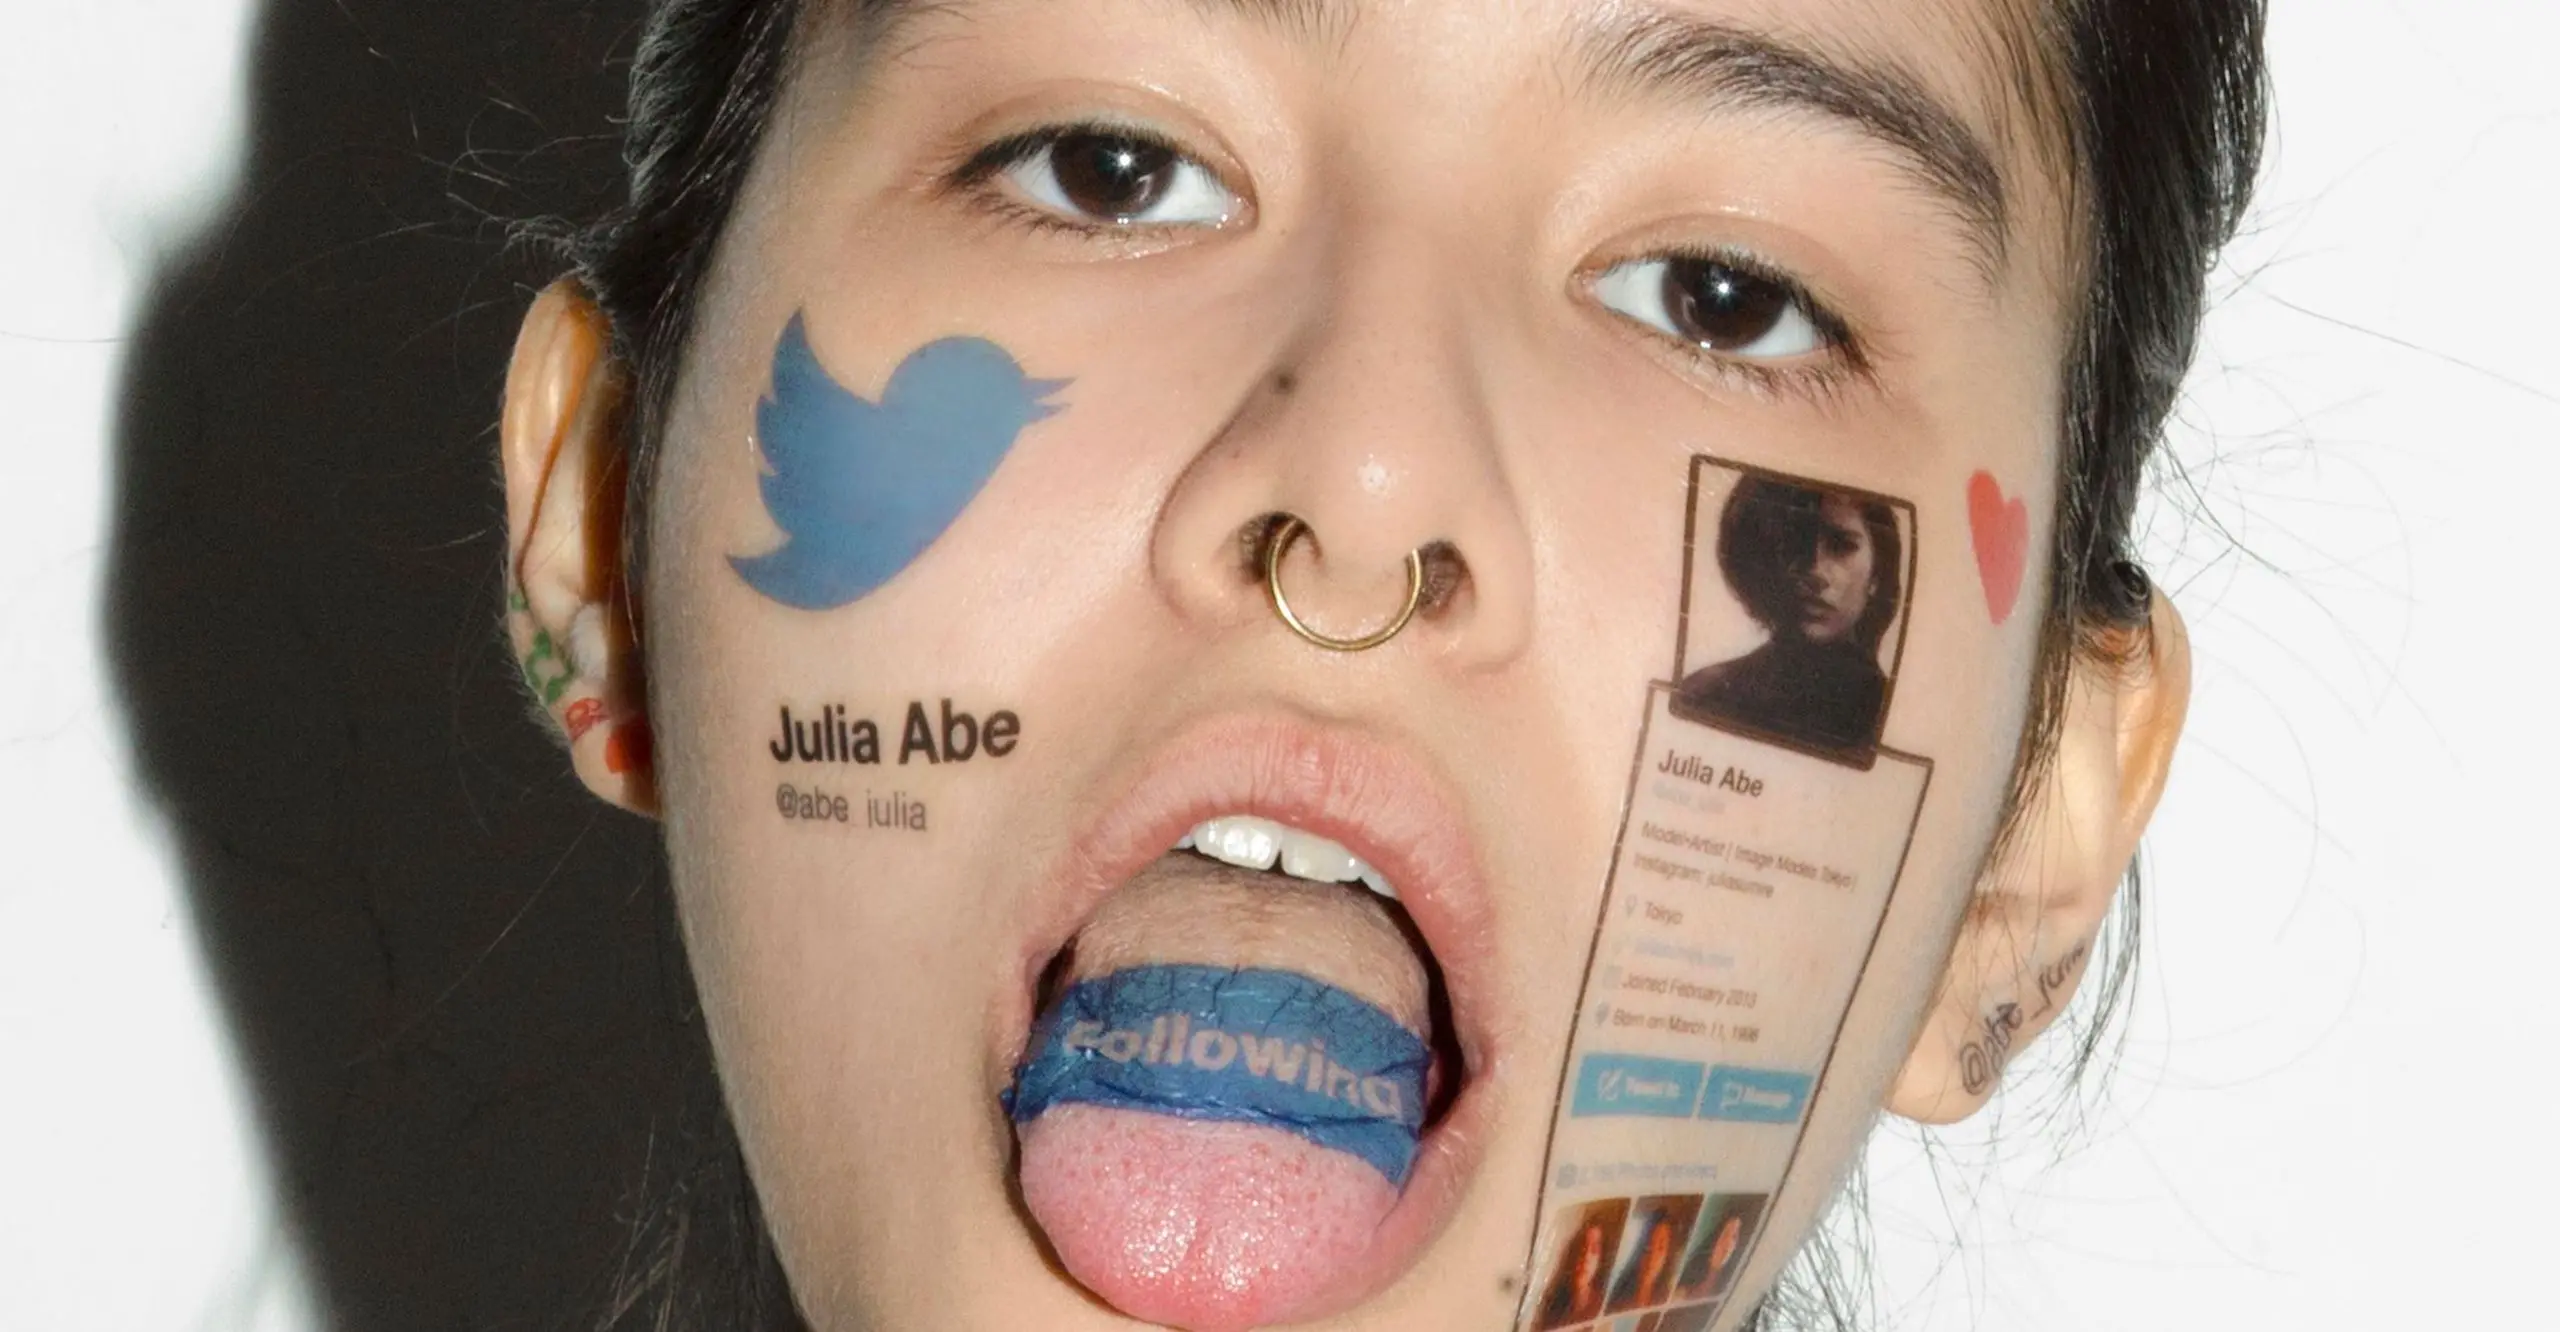 image of a person's face covered in twitter icons and logos, by artist Yuyi John at the Photographers' Gallery London